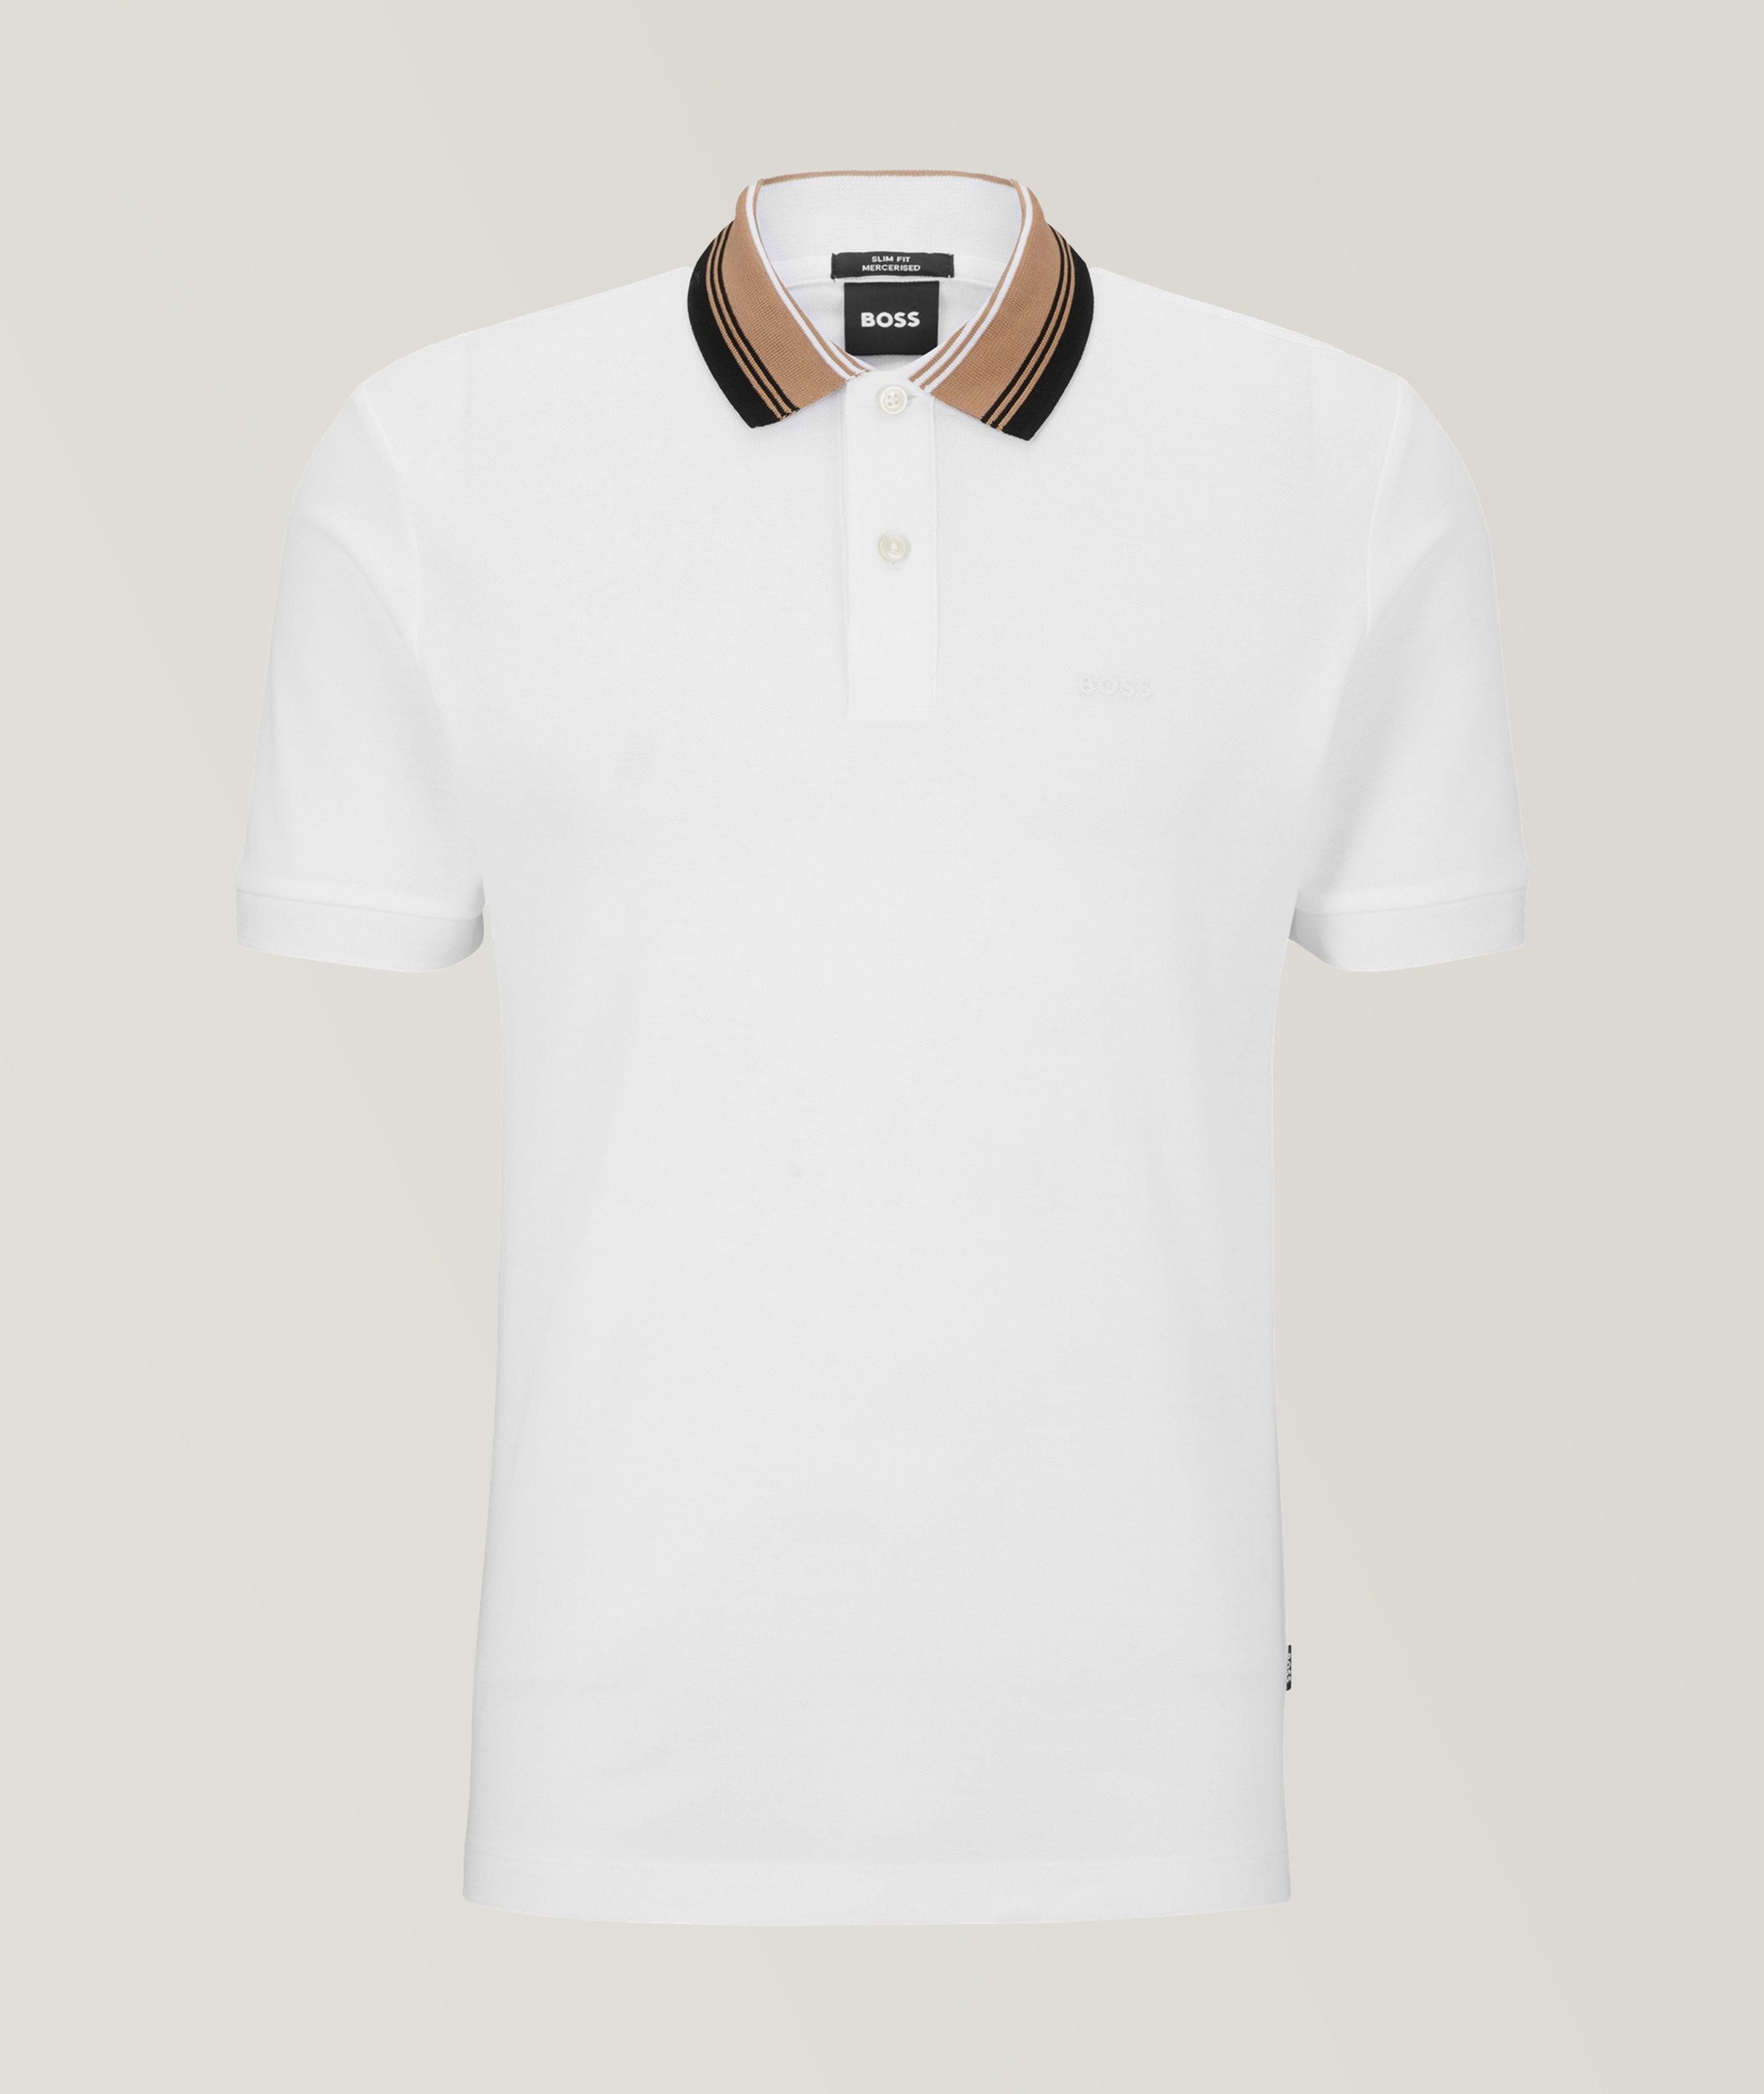 BOSS Contrast Tipped Mercerized Cotton Polo | Sweaters & Knits | Harry ...